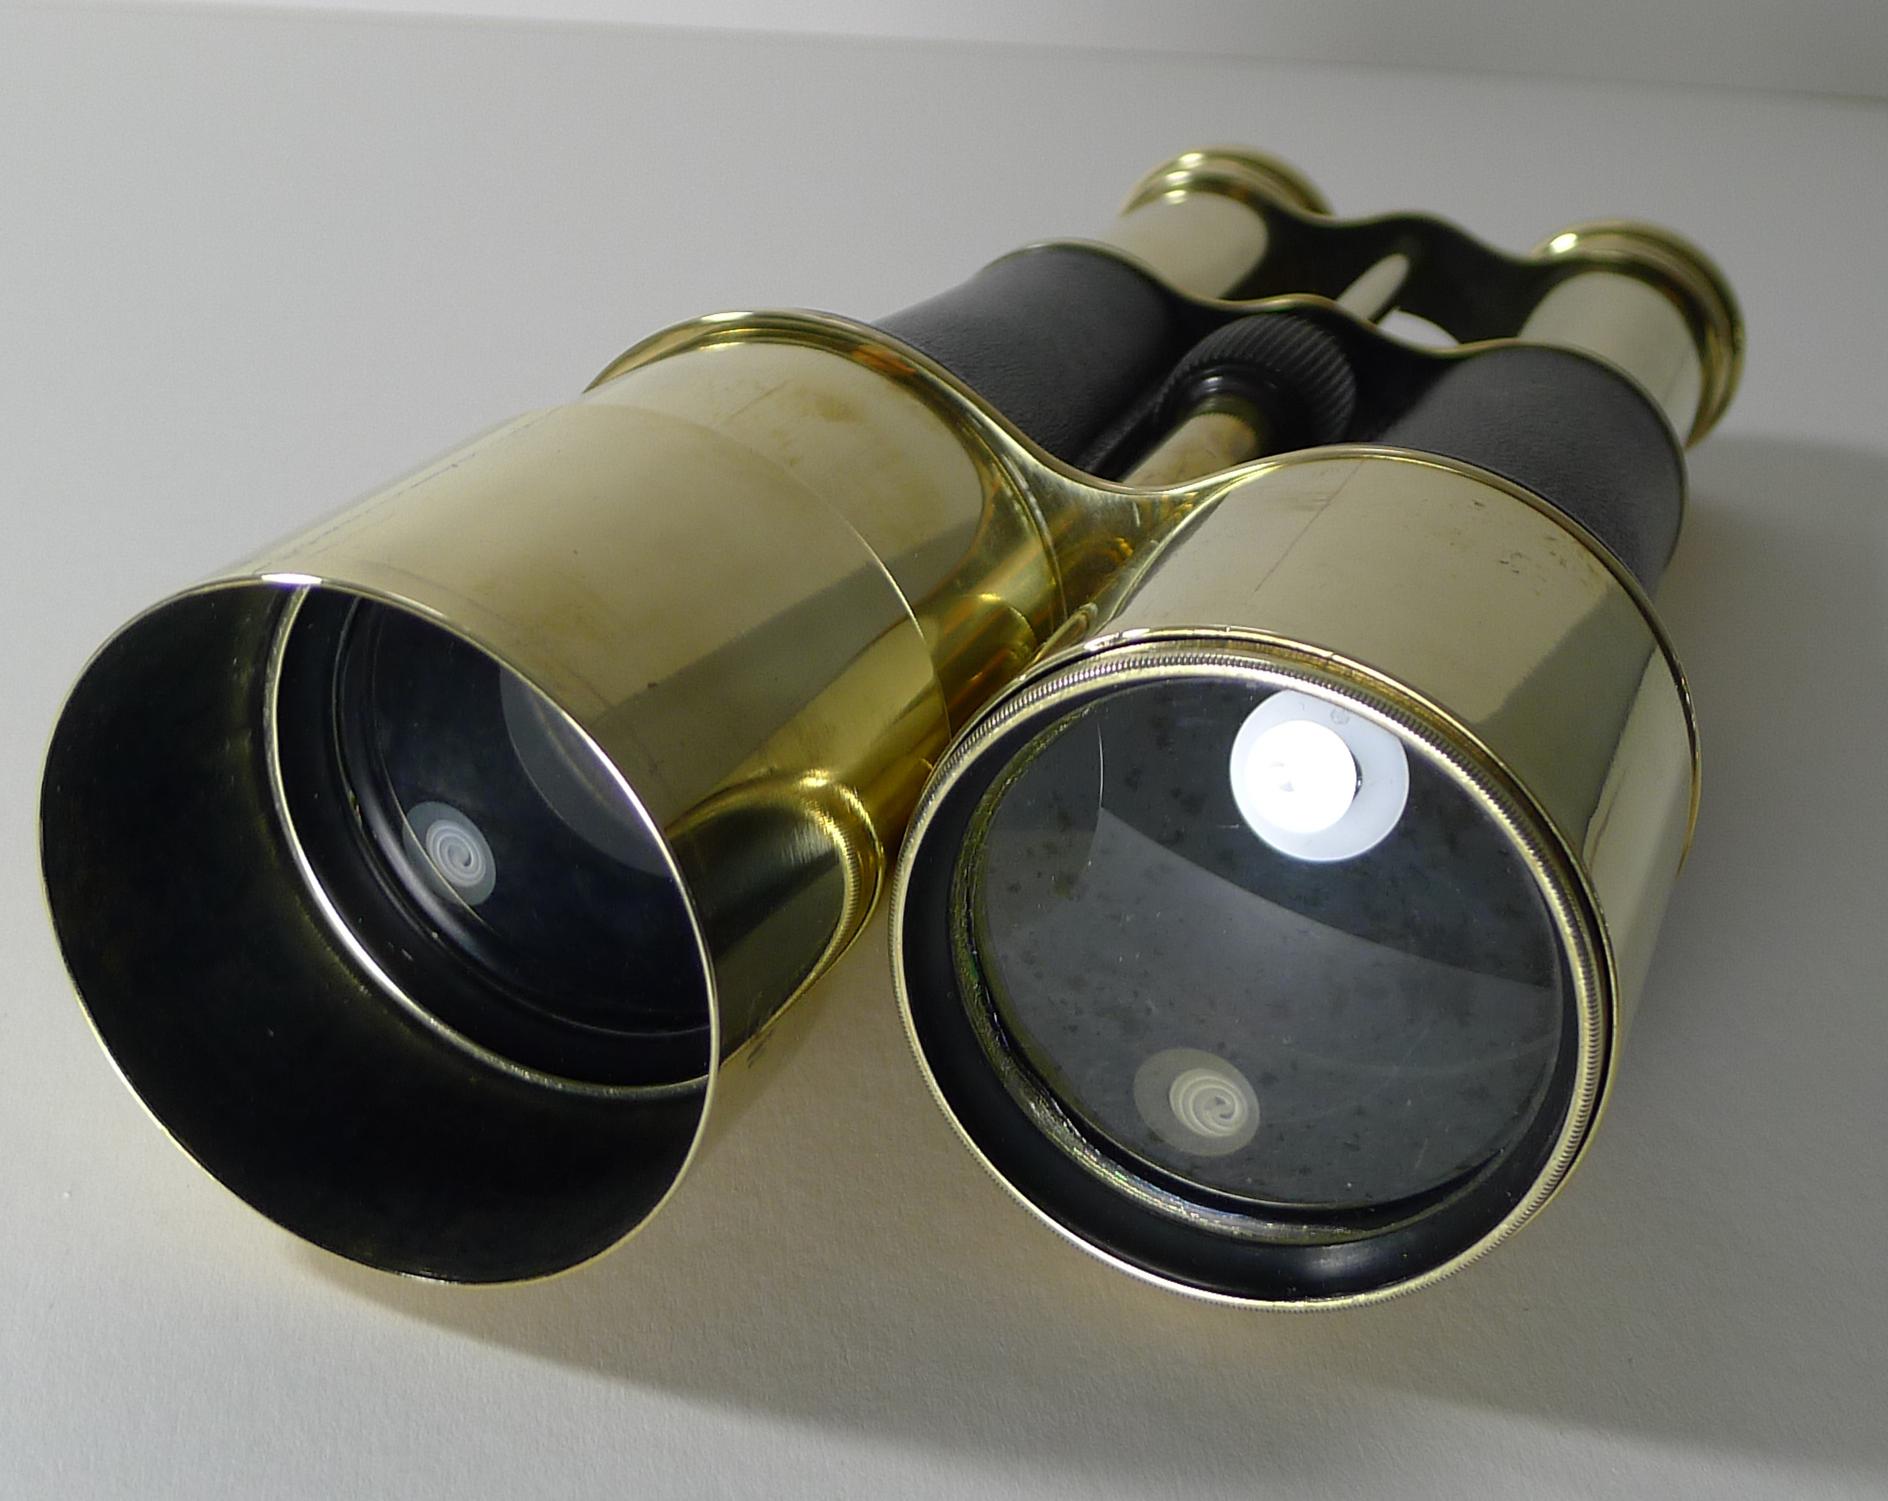 A really unusual and impressive pair of World War 1 pair of British issued military binoculars meticulously professionally cleaned and polished, restoring them to their former glory; the barrels wrapped in leather.

The bridge is stamped with the